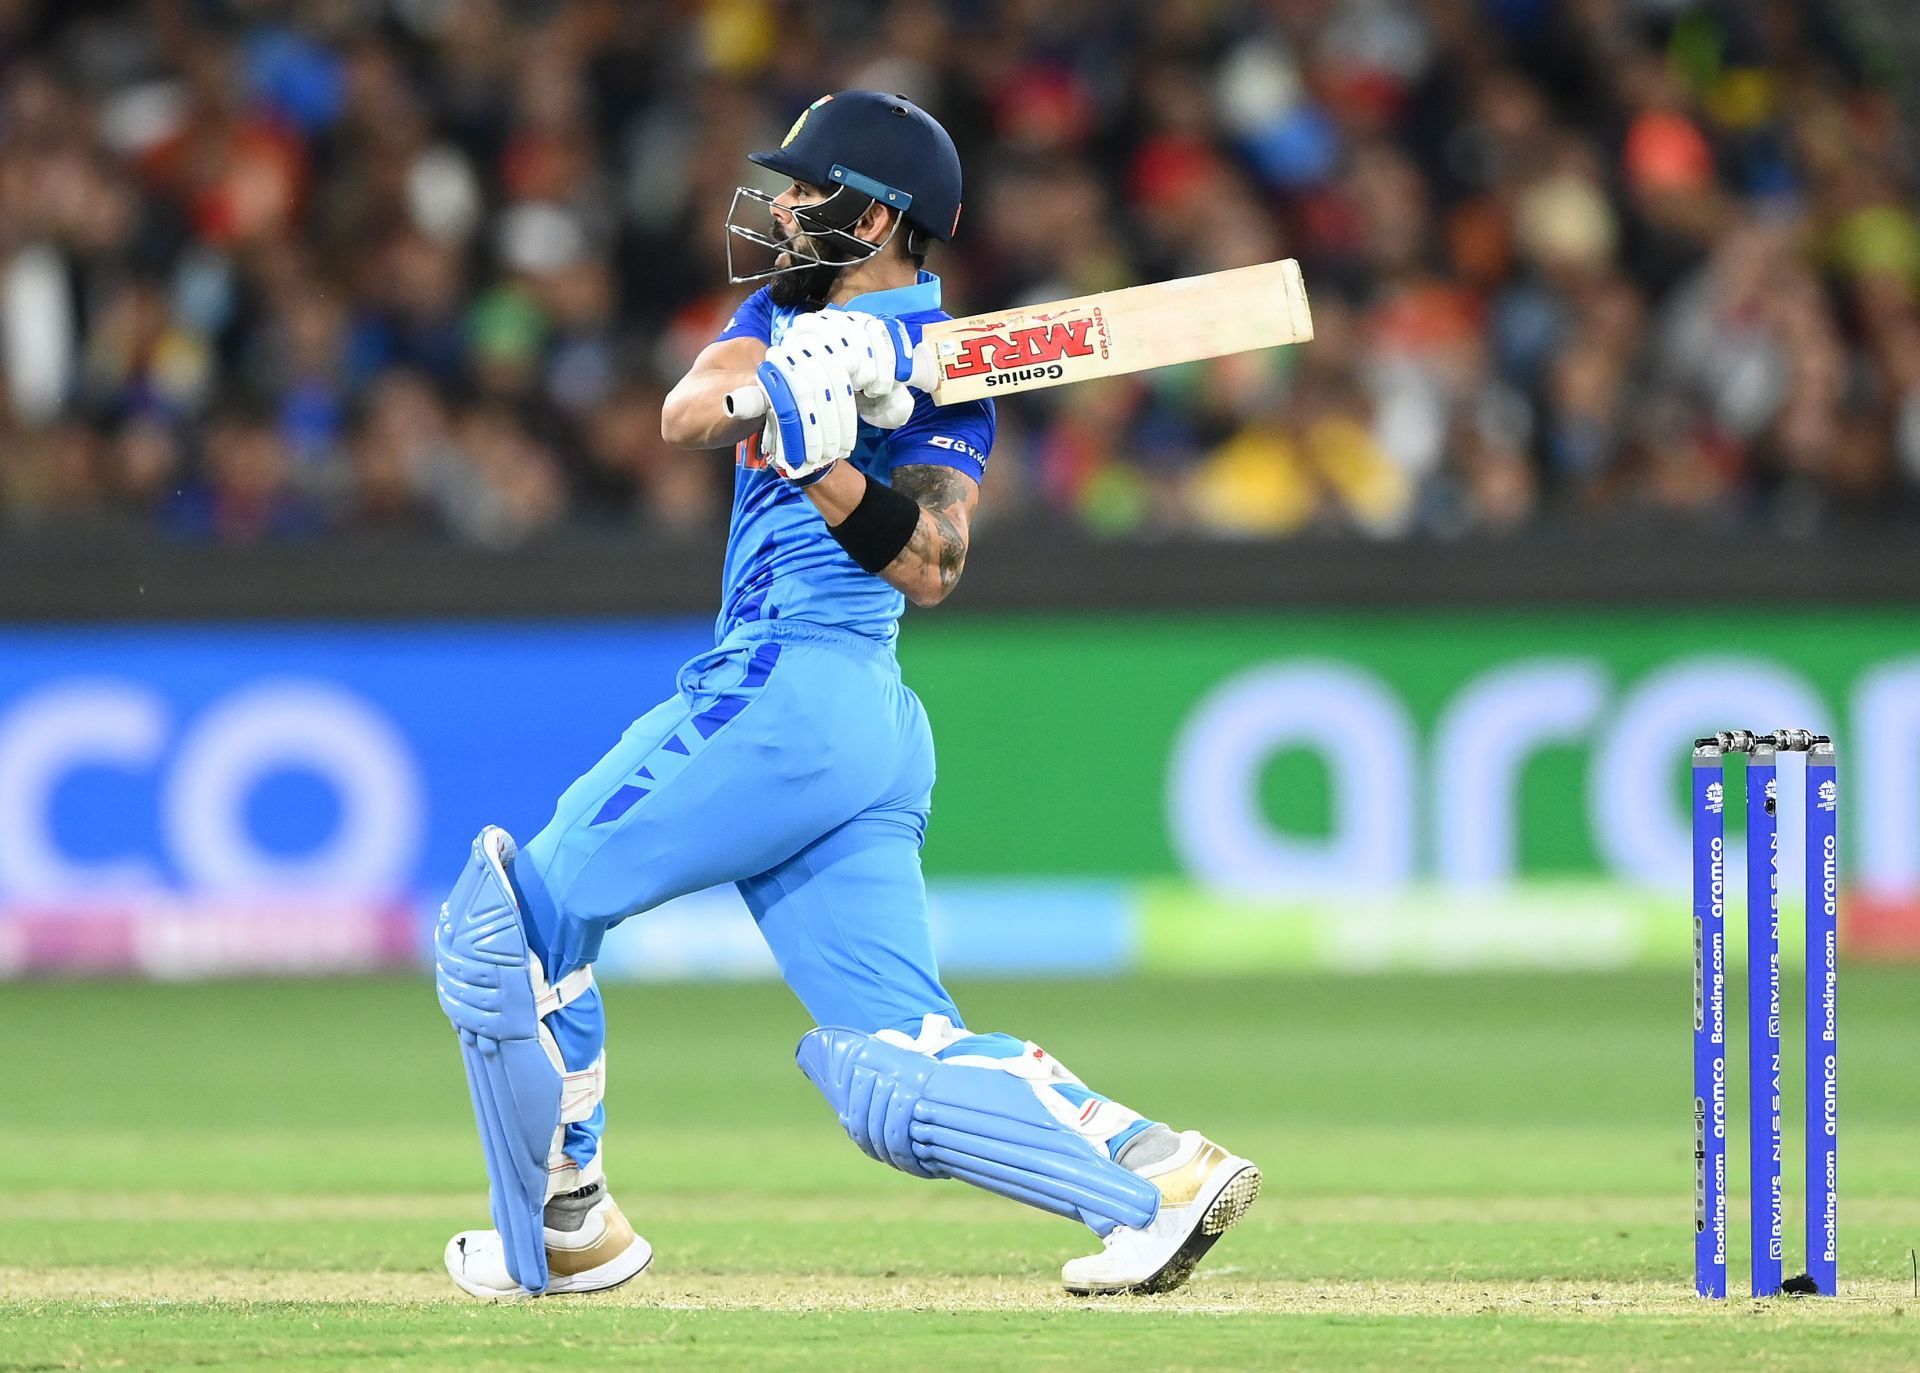 Virat Kohli clubbed sixes on the last two deliveries of the penultimate over bowled by Haris Rauf.